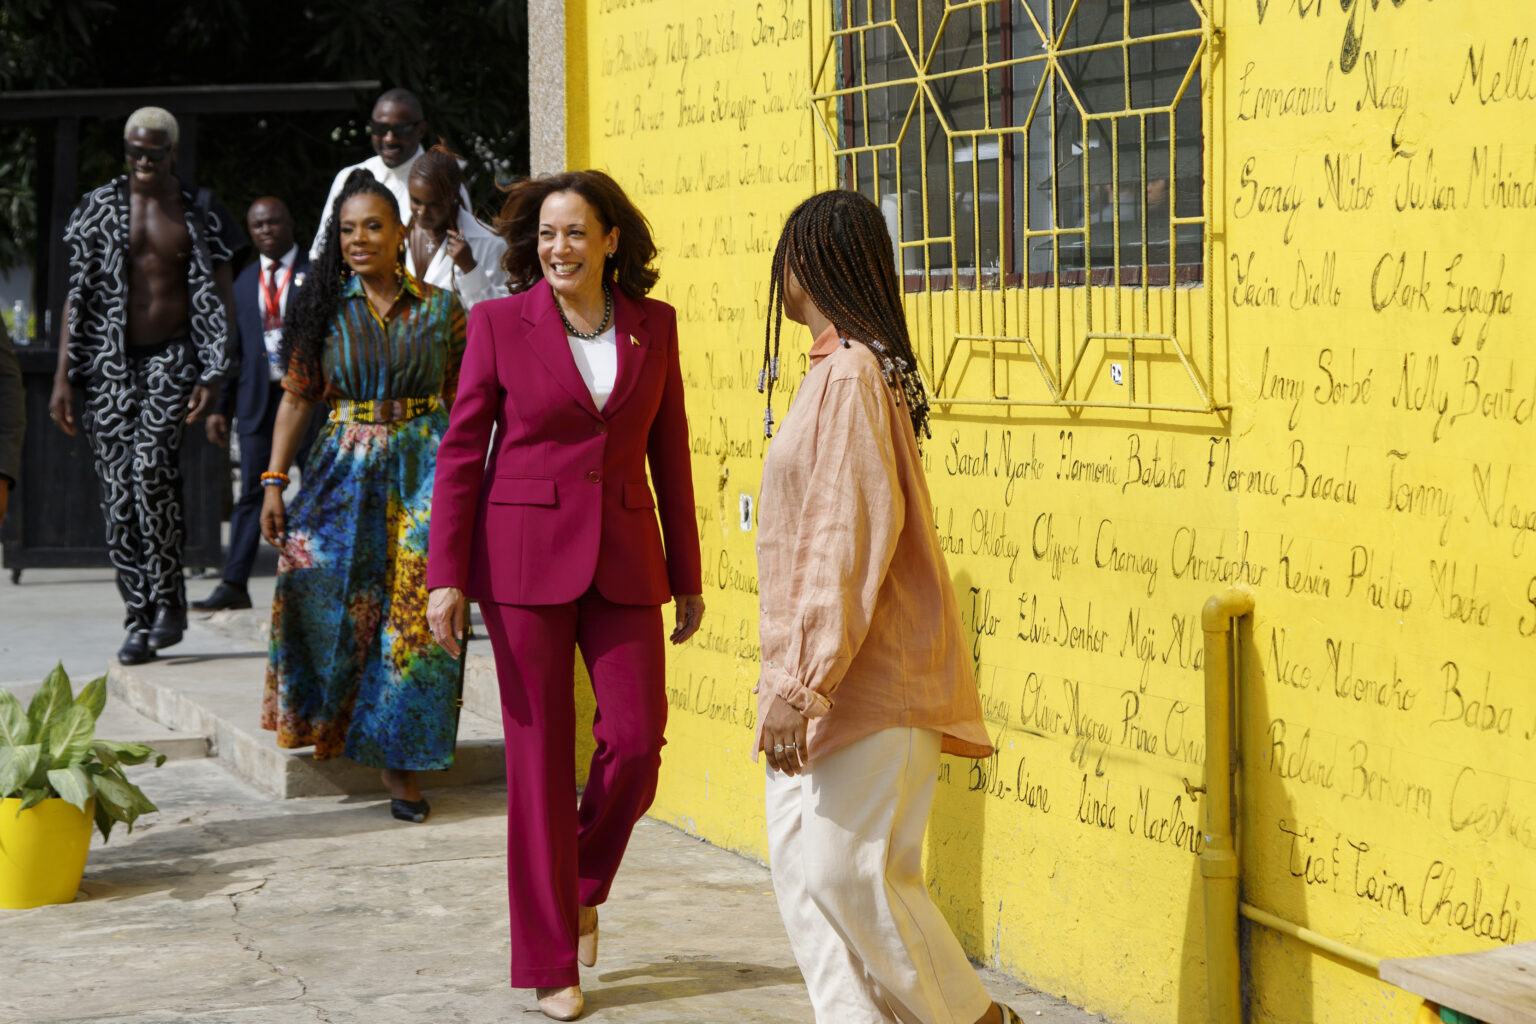 Vice President Kamala Harris, center, followed by actress Sheryl Lee Ralph, visits the Vibrate Space at the Freedom Skatepark in Accra, Ghana, on Monday, March 27, 2023. Vibrate Space is a workstation for young creative artists that includes a community recording studio and music business program. Harris is finishing a seven-day African visit that also took her to Tanzania and Zambia. Photo credit: Misper Apawu, The Associated Press